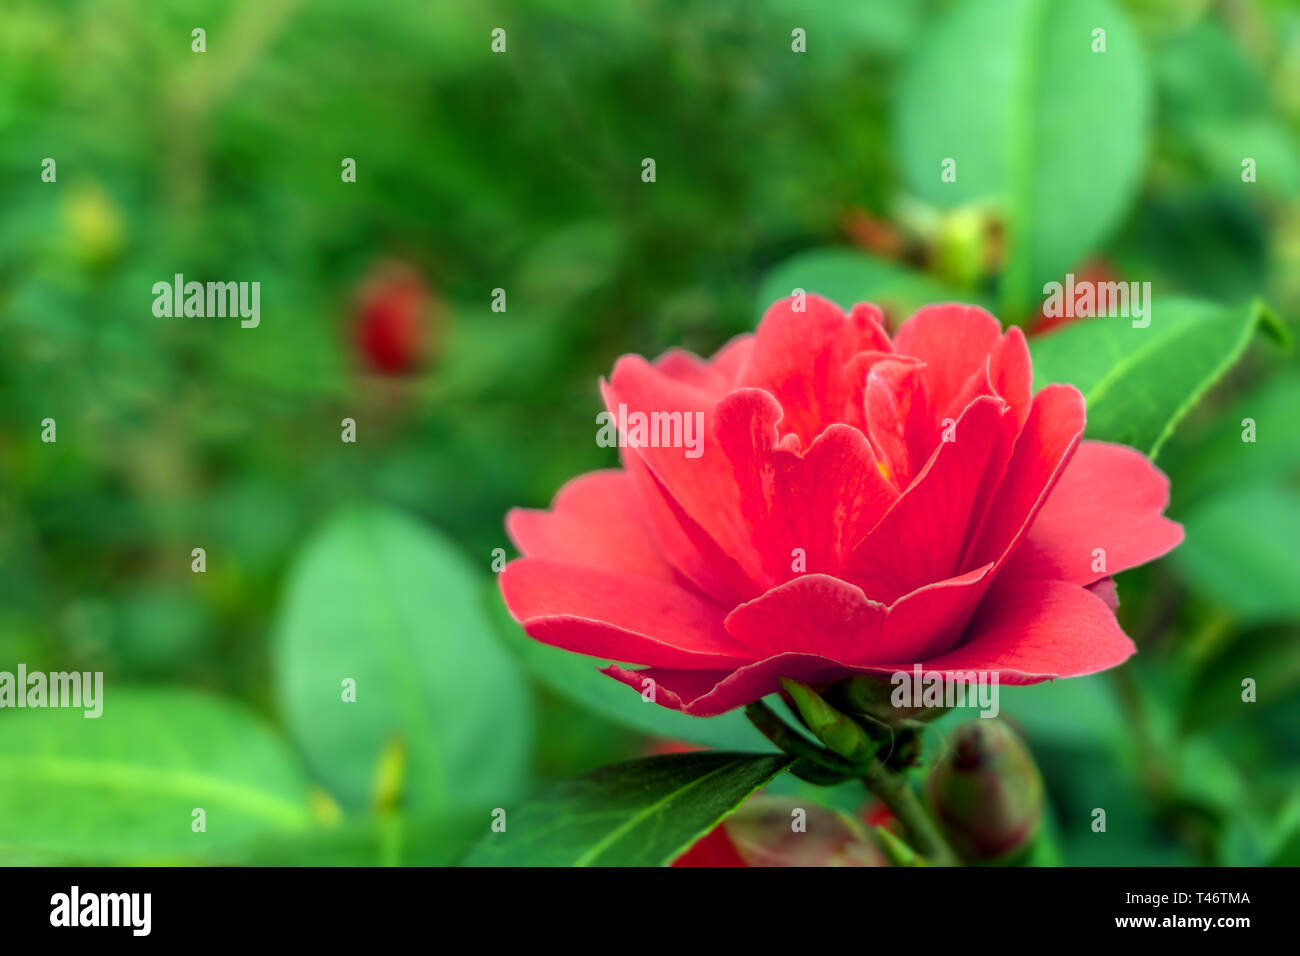 Close-up of a red Camellia freedom bell (Japanese Camellia) Flower with green Leaves in the Background. View of a purple Camellia Flower. Stock Photo